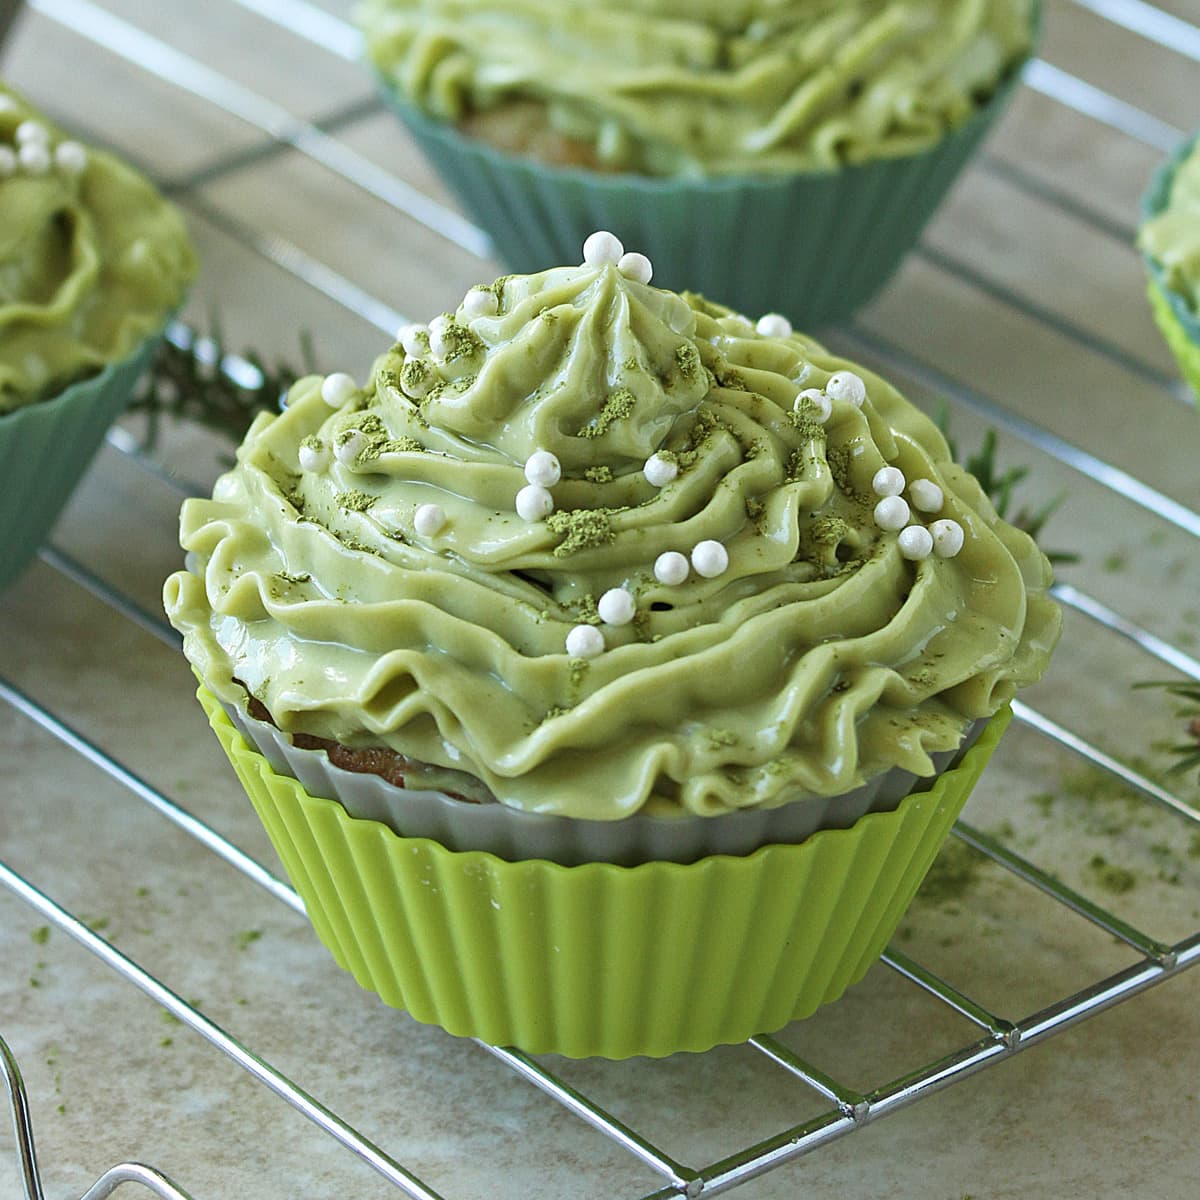 Dessert matcha cupcakes with cream cheese green tea frosting.